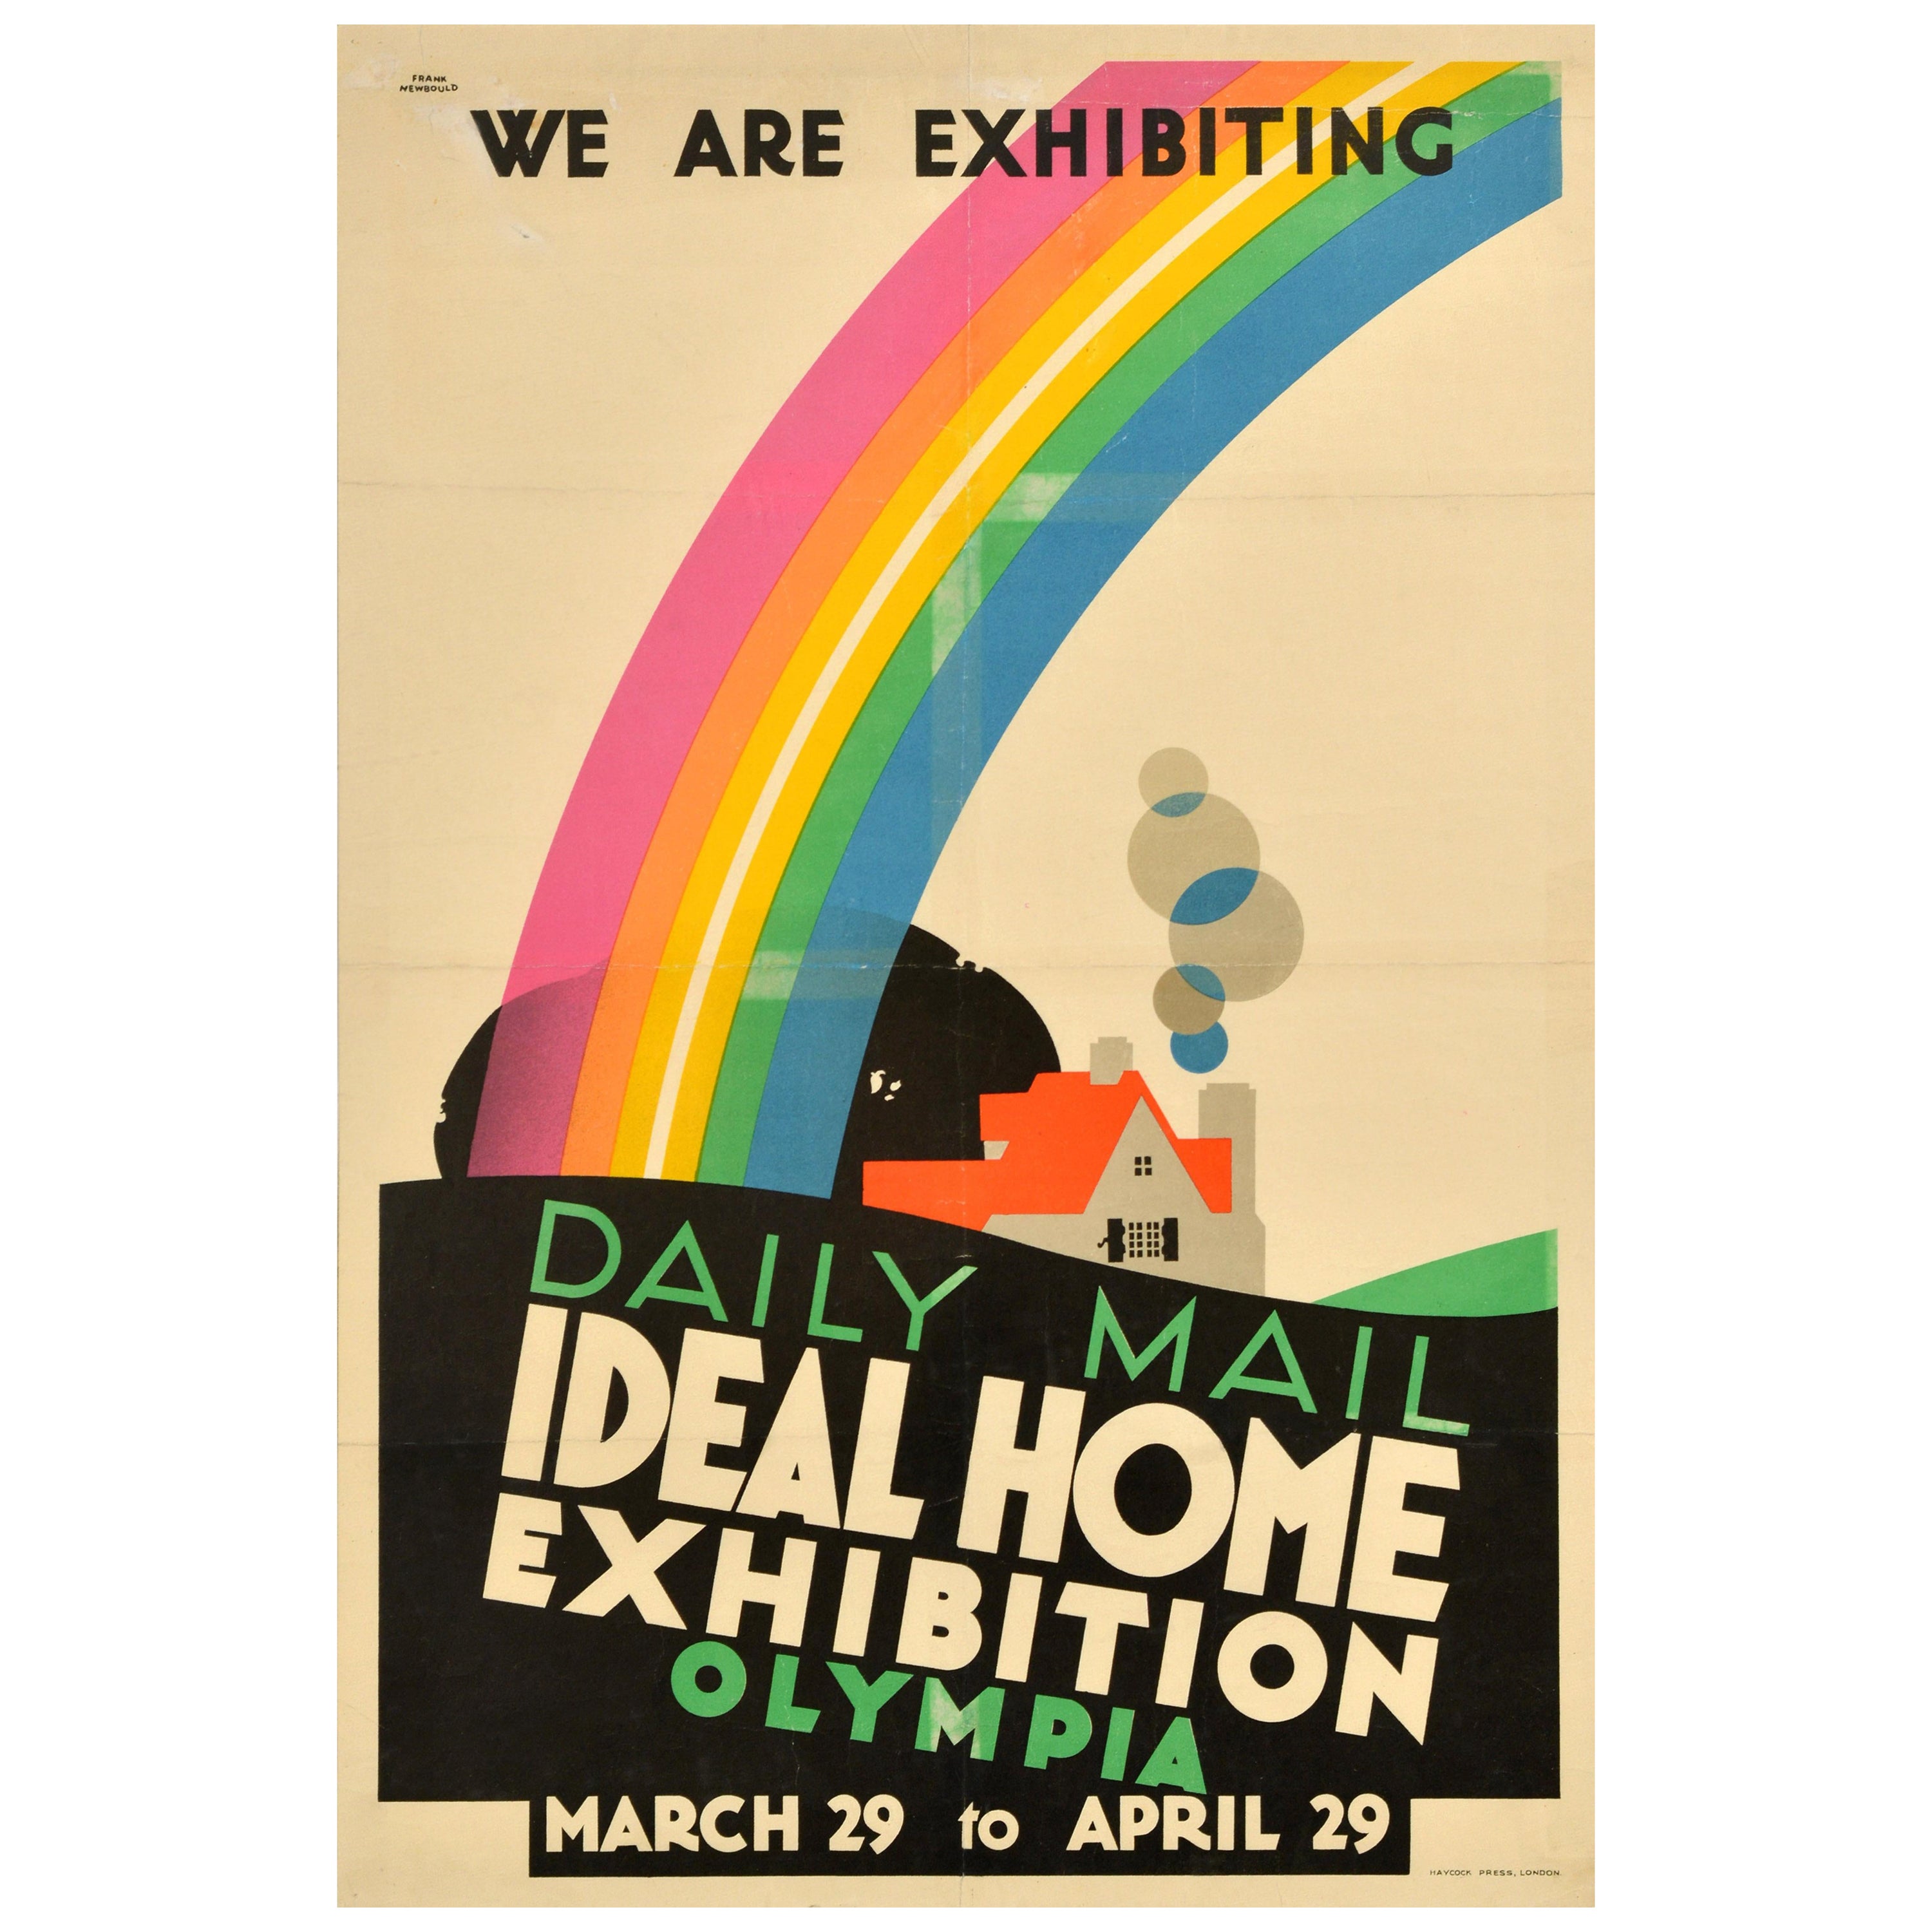 Original Vintage Advertising Poster Ideal Home Exhibition Daily Mail Olympia For Sale